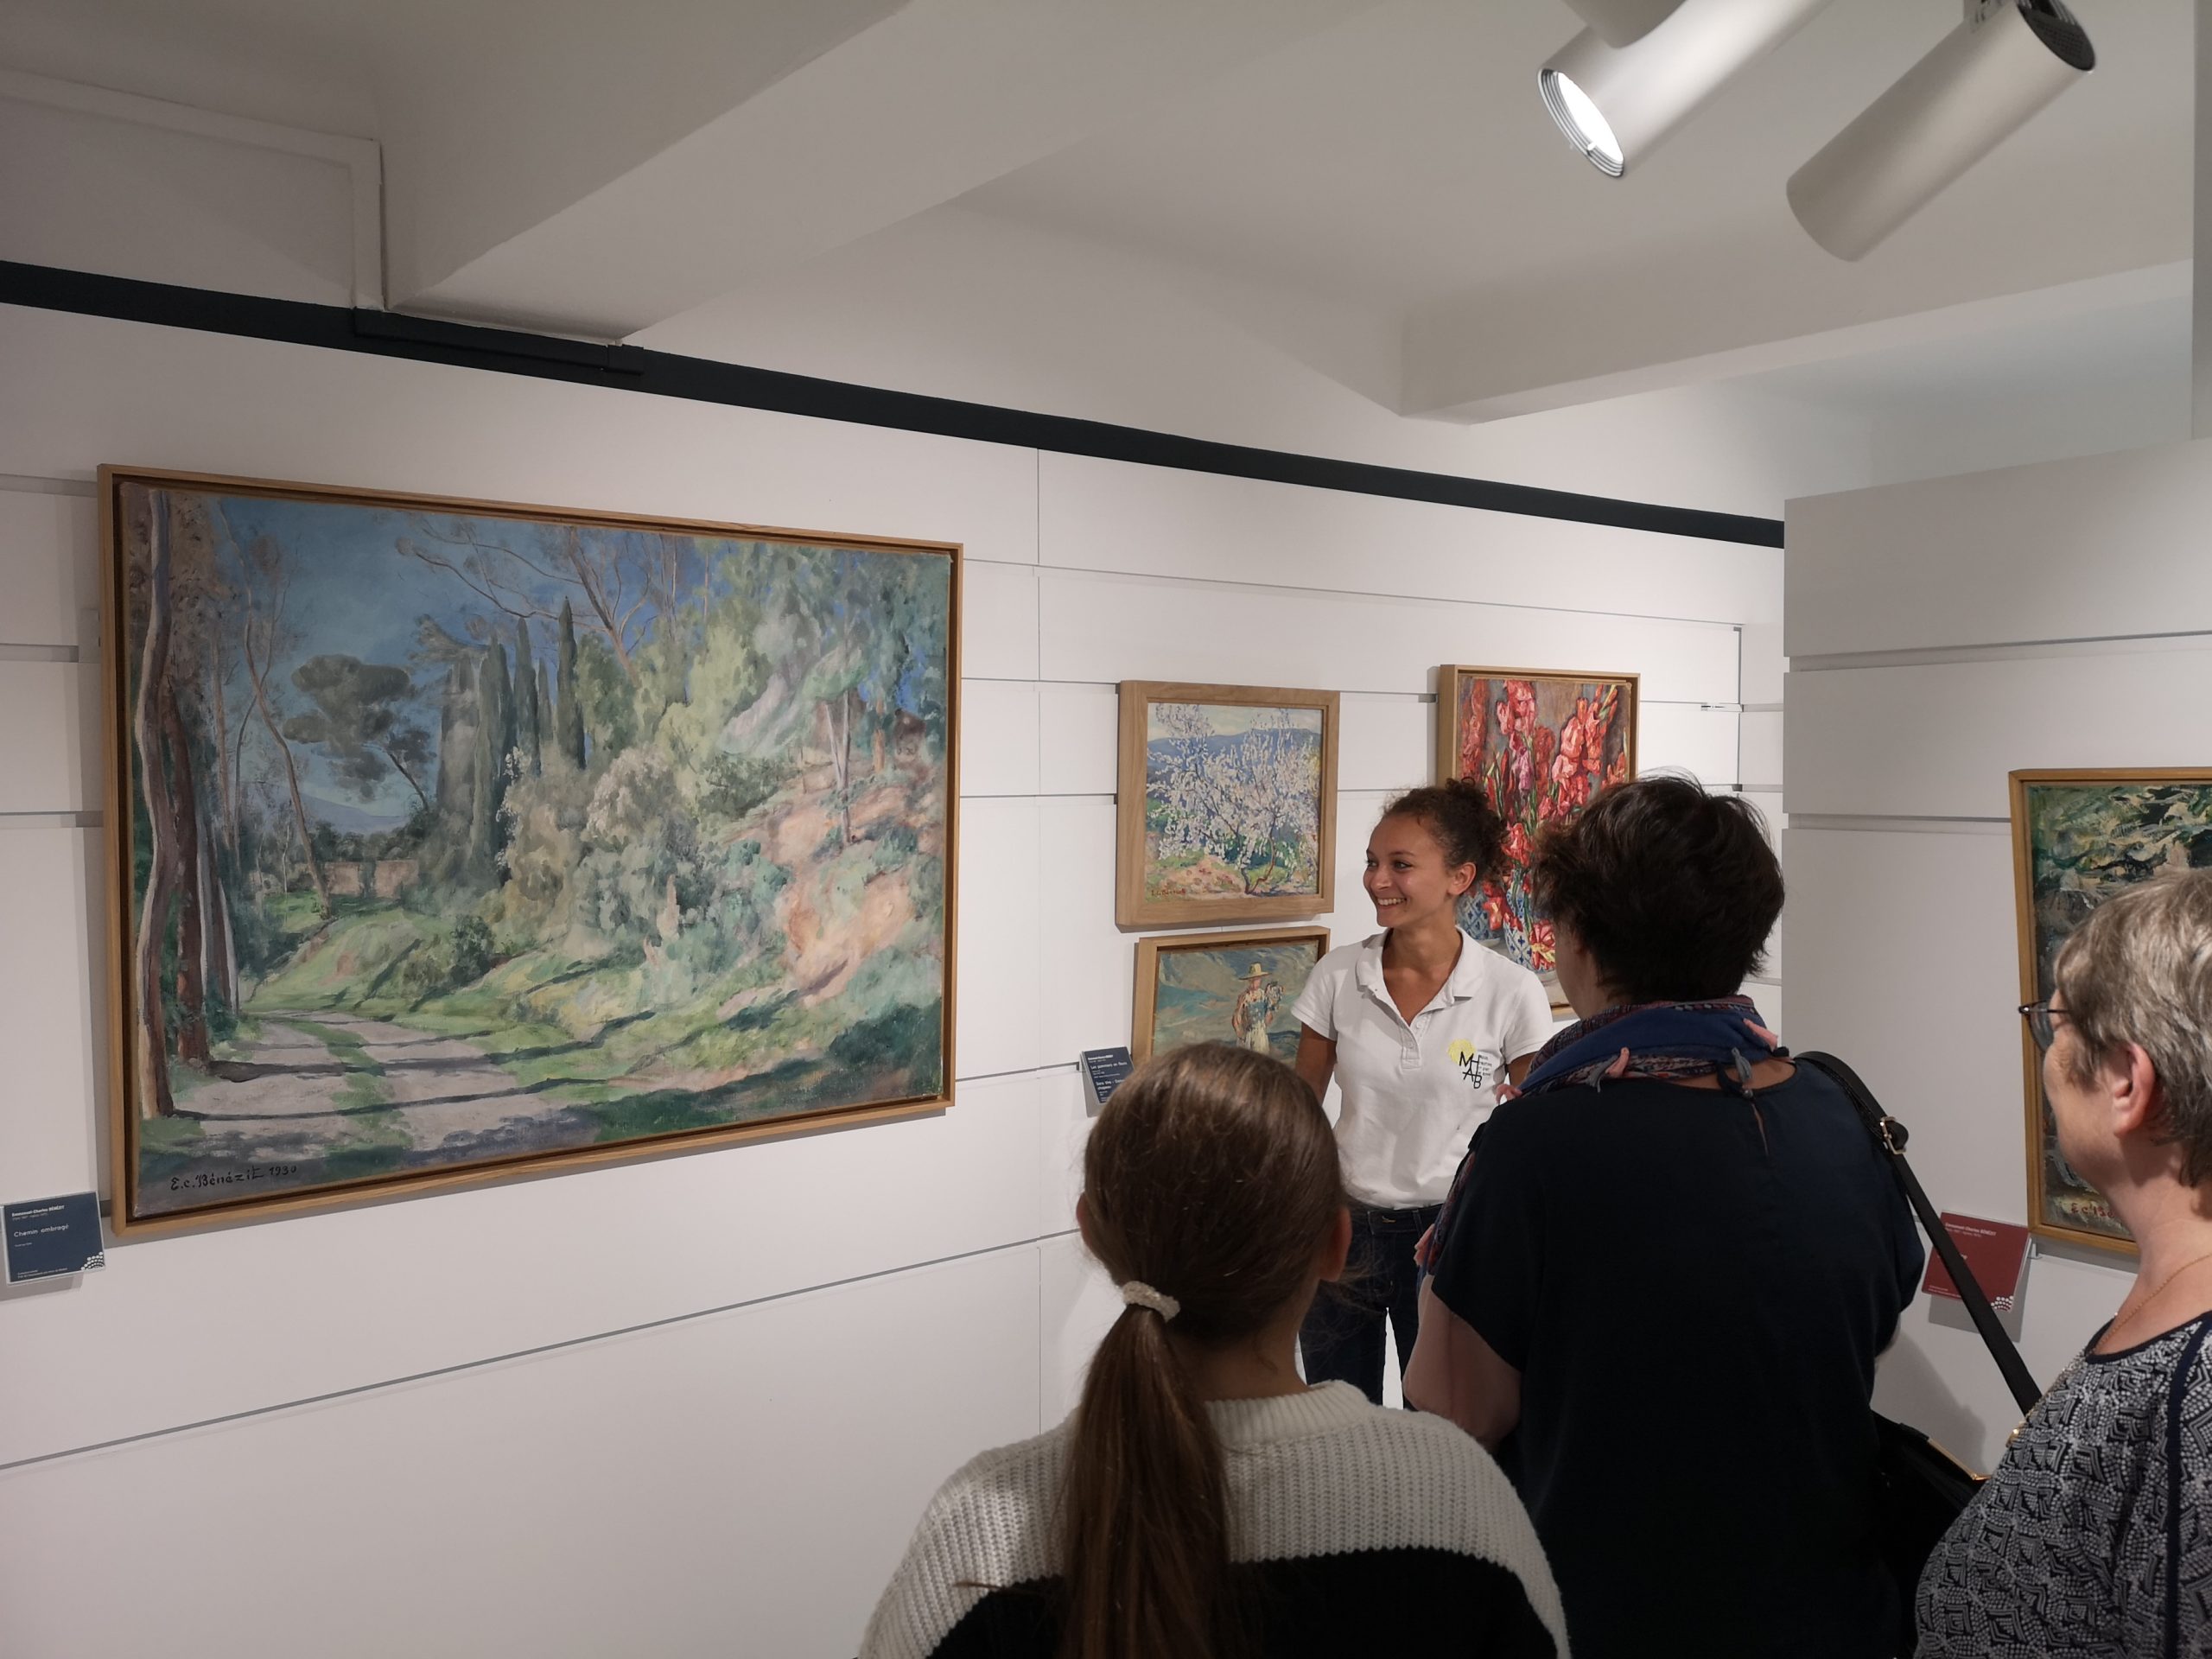 Guided tour: temporary exhibitions